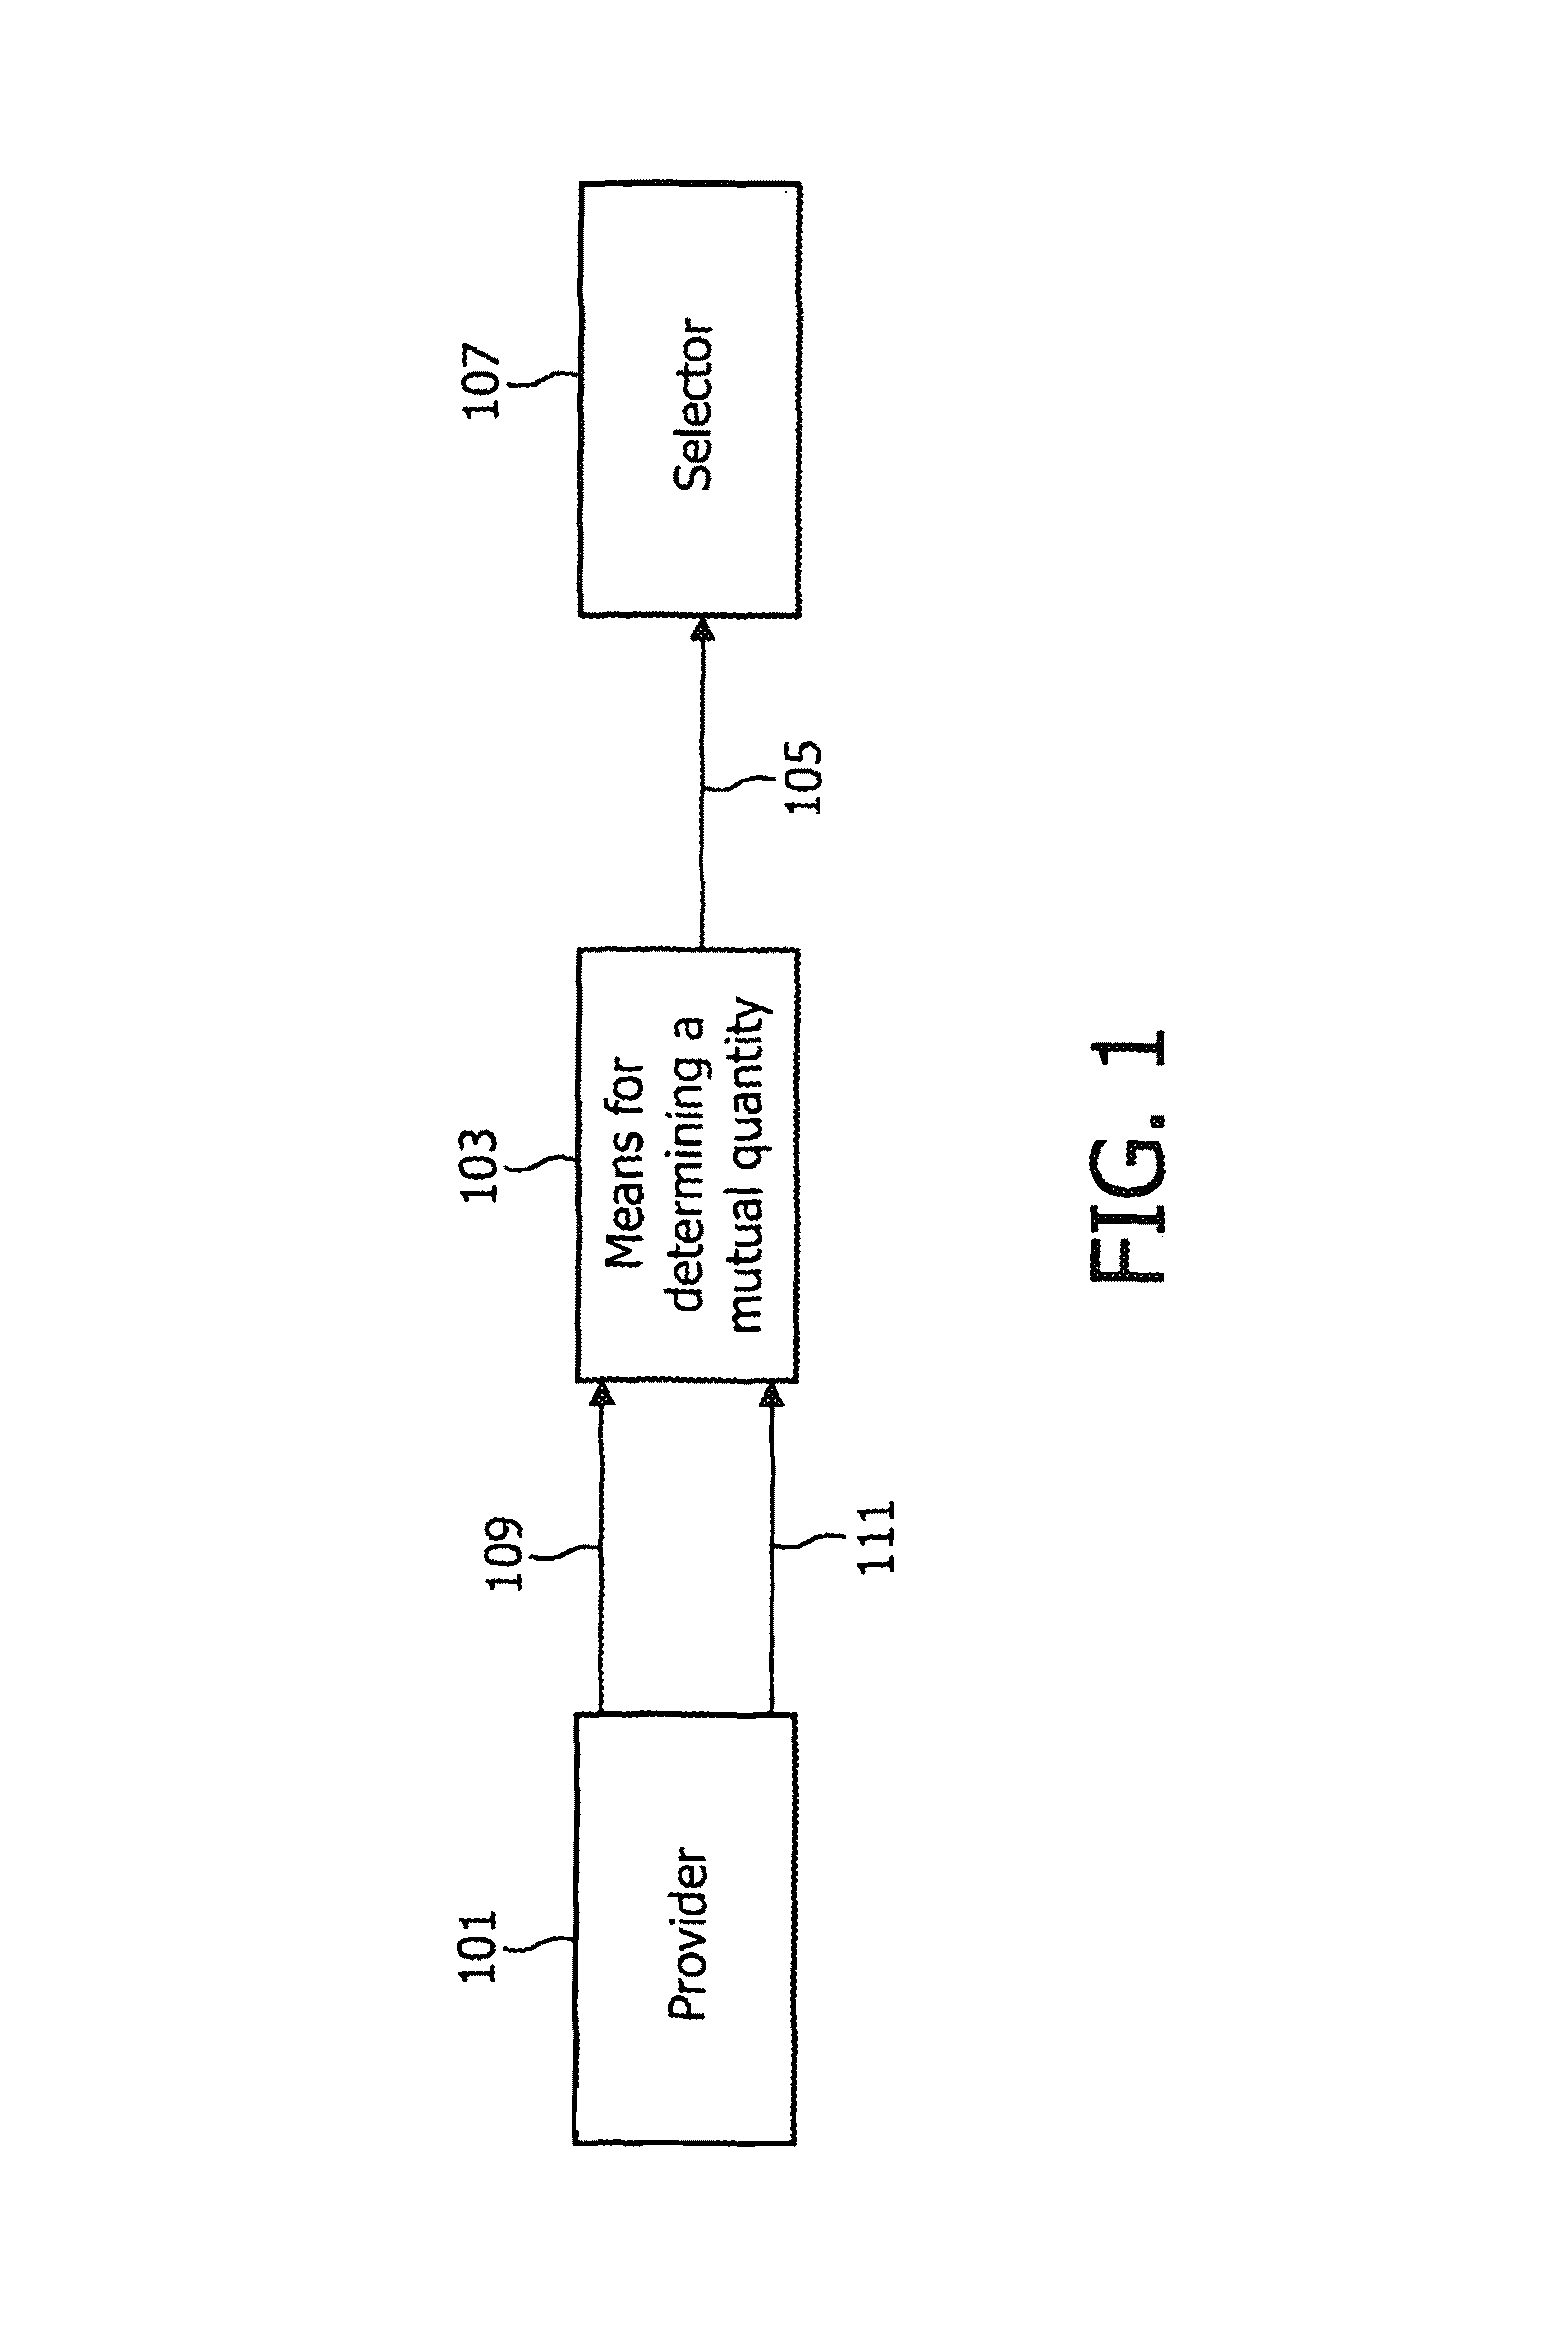 Coil element selection device for selecting elements of a receiver coil array of a magnetic resonance imaging device